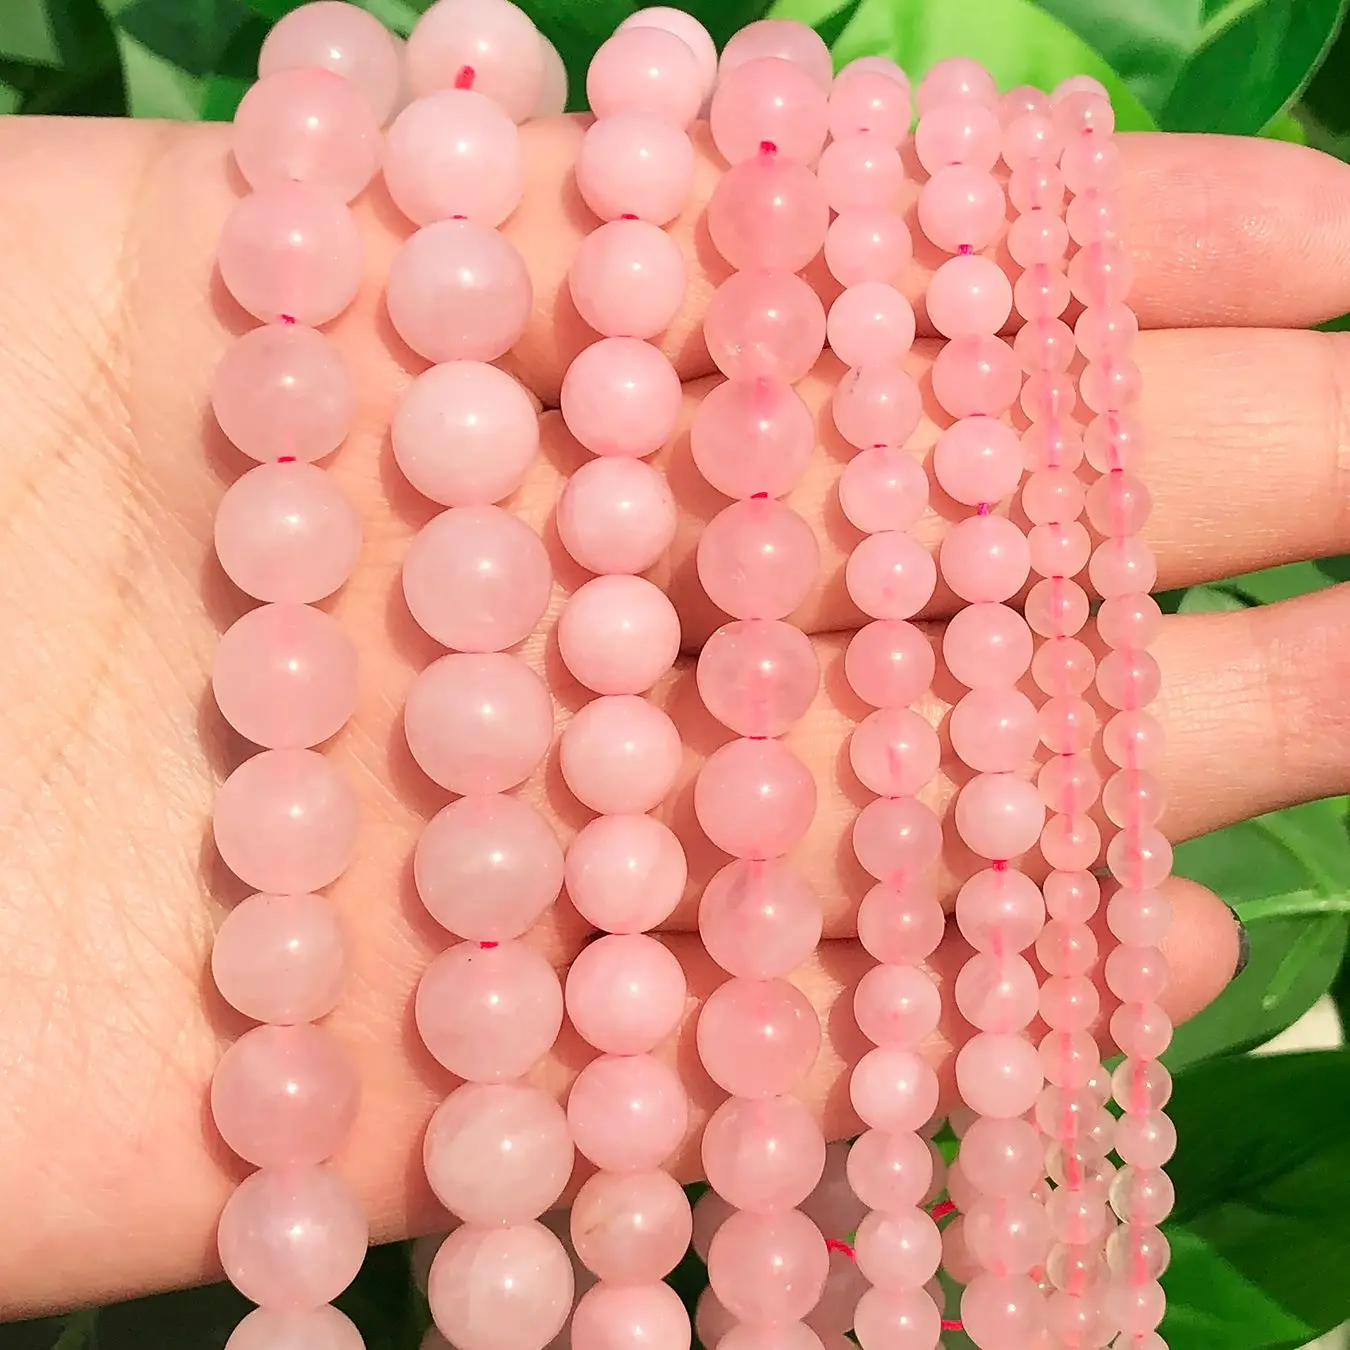 

Natural Pink Quartz Crystal Jades Stone Glass Beads Smooth Round Loose Space Beads For Jewelry Making DIY Charms Bracelet Crafts